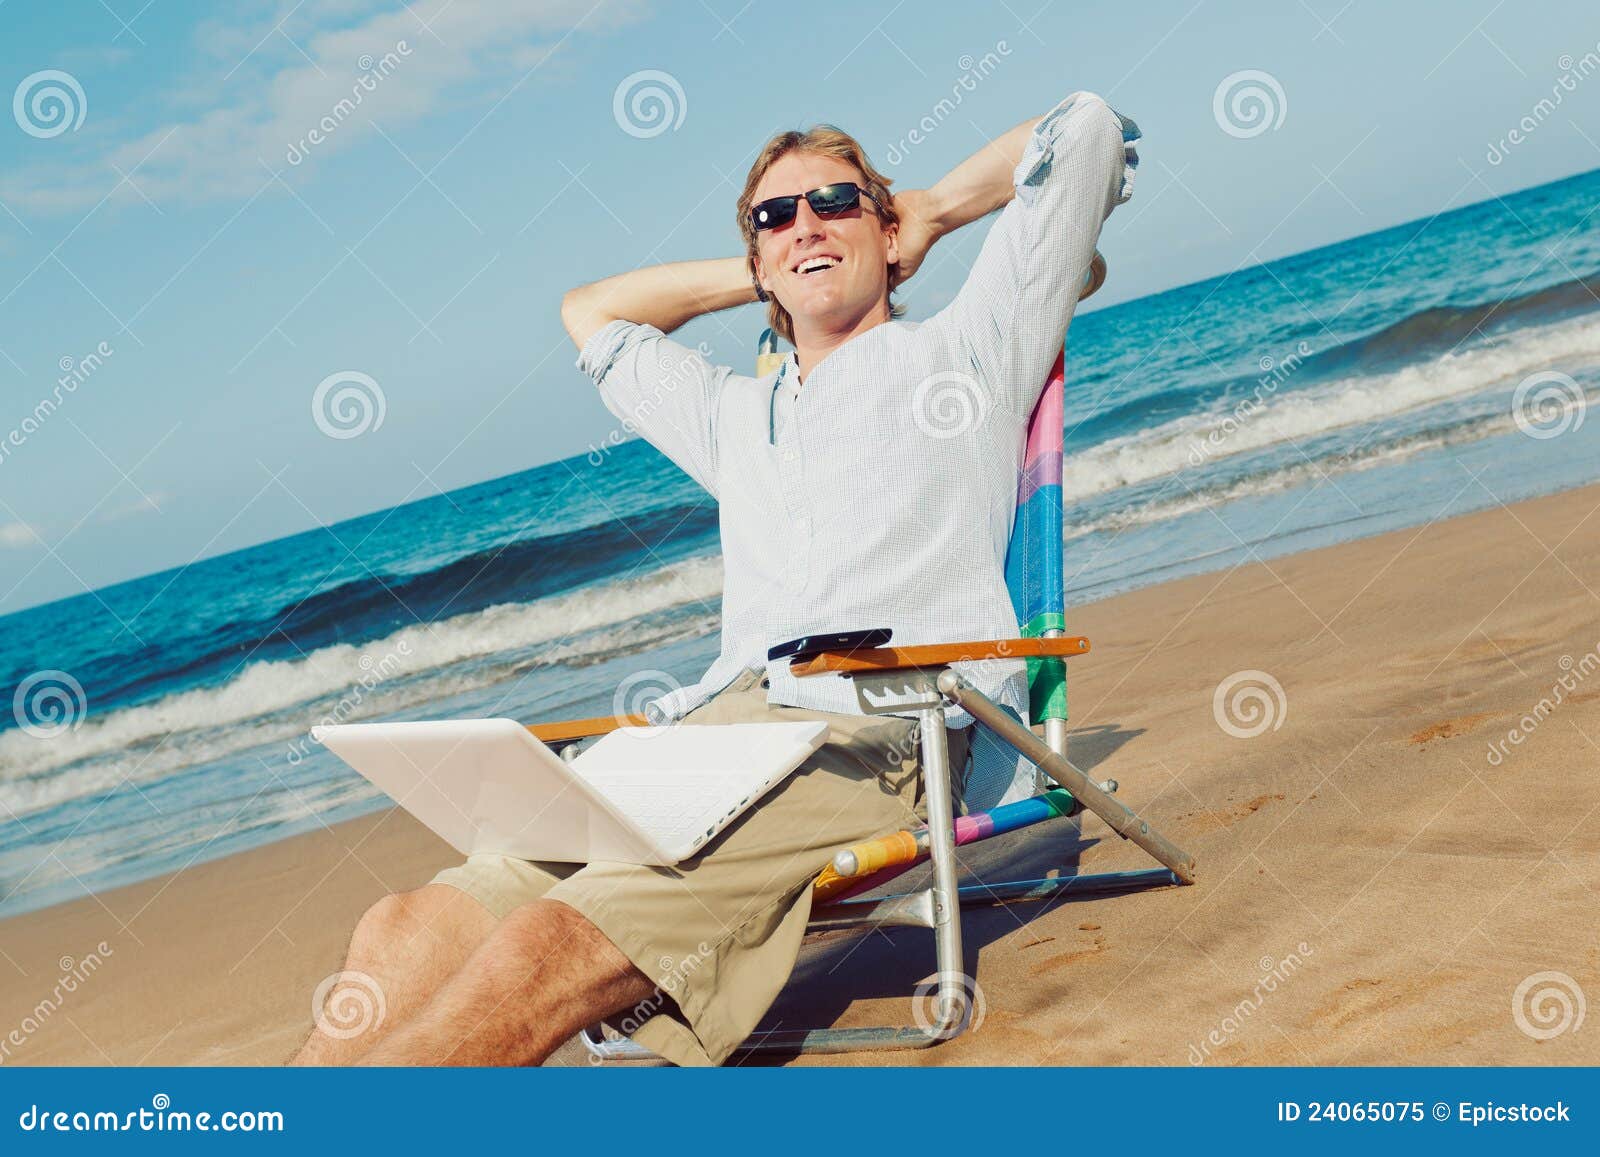 Business Man on the Beach stock image. Image of corporate - 24065075